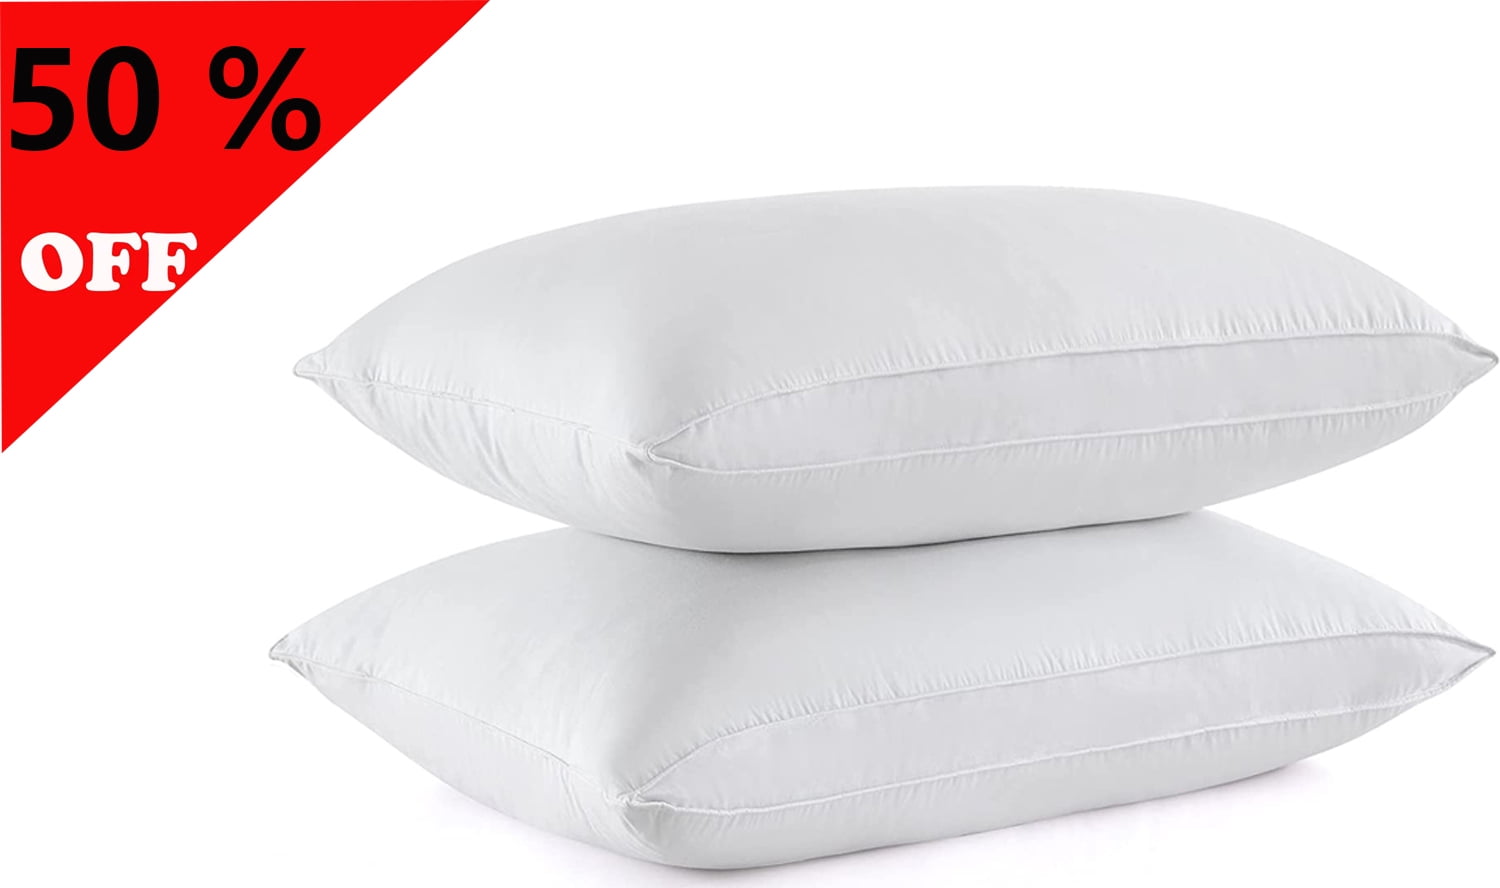 Damome Goose Feathers Down Pillows for Sleeping(2  Pack),King(20inx36in)-White Bed Pillow Inserts,100% Cotton Cover,Sleeping  Pillows for All Sleepers